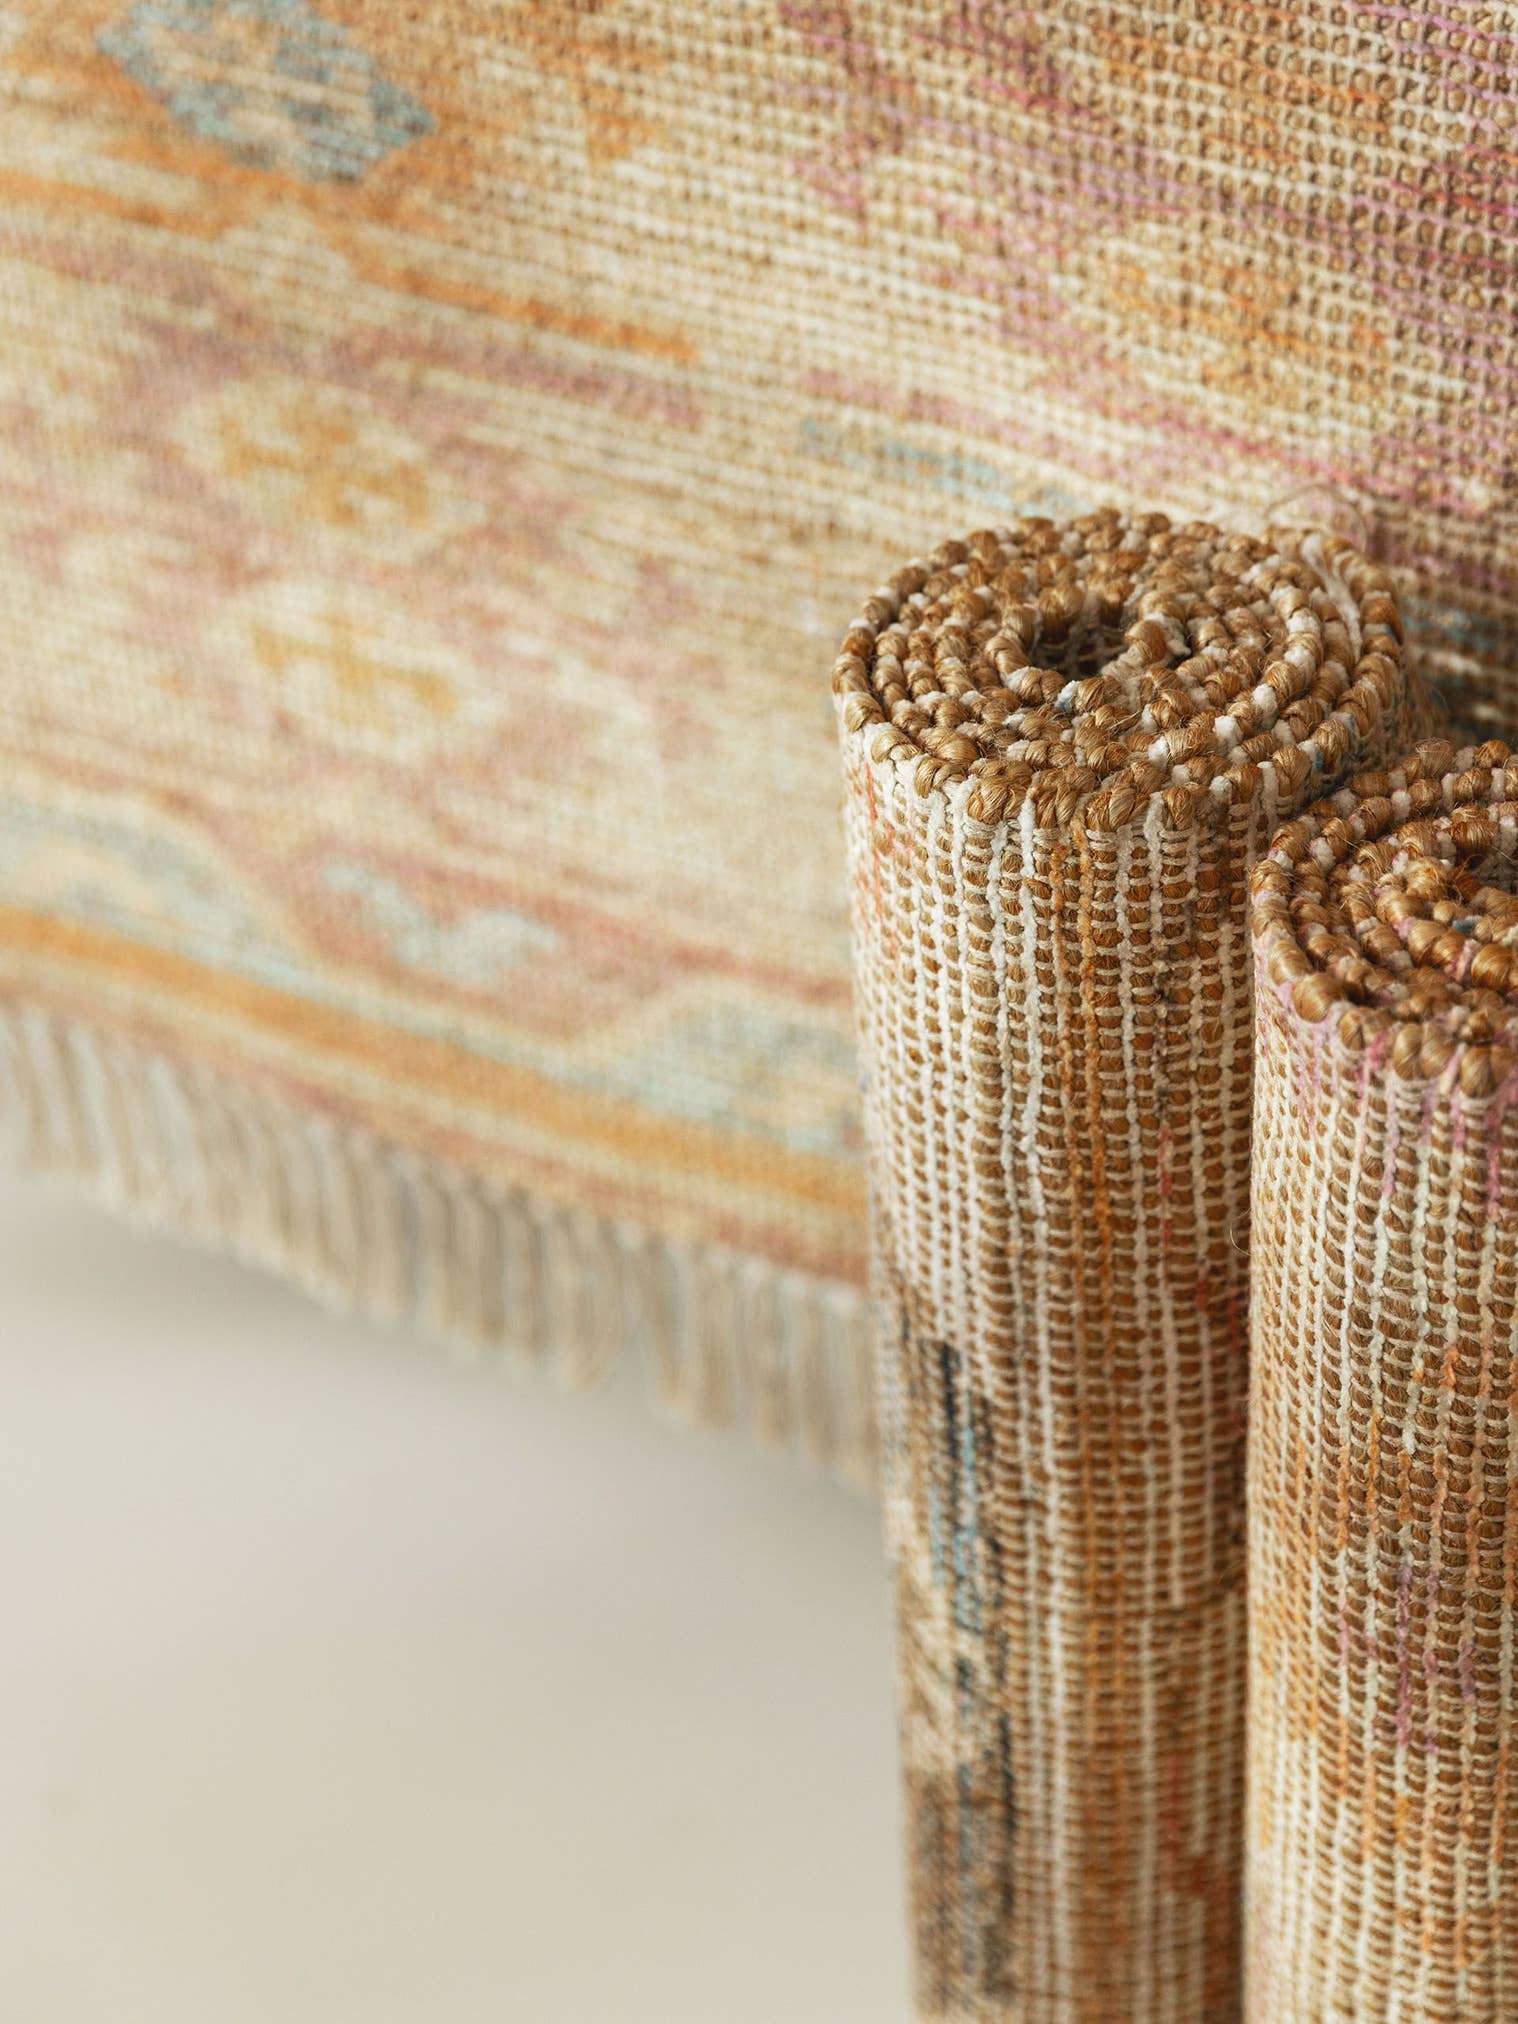 Rug made of 68% jute, 20% polyester, 12% cotton in Multicoloured with a 1- 5 mm high pile by benuta Pop